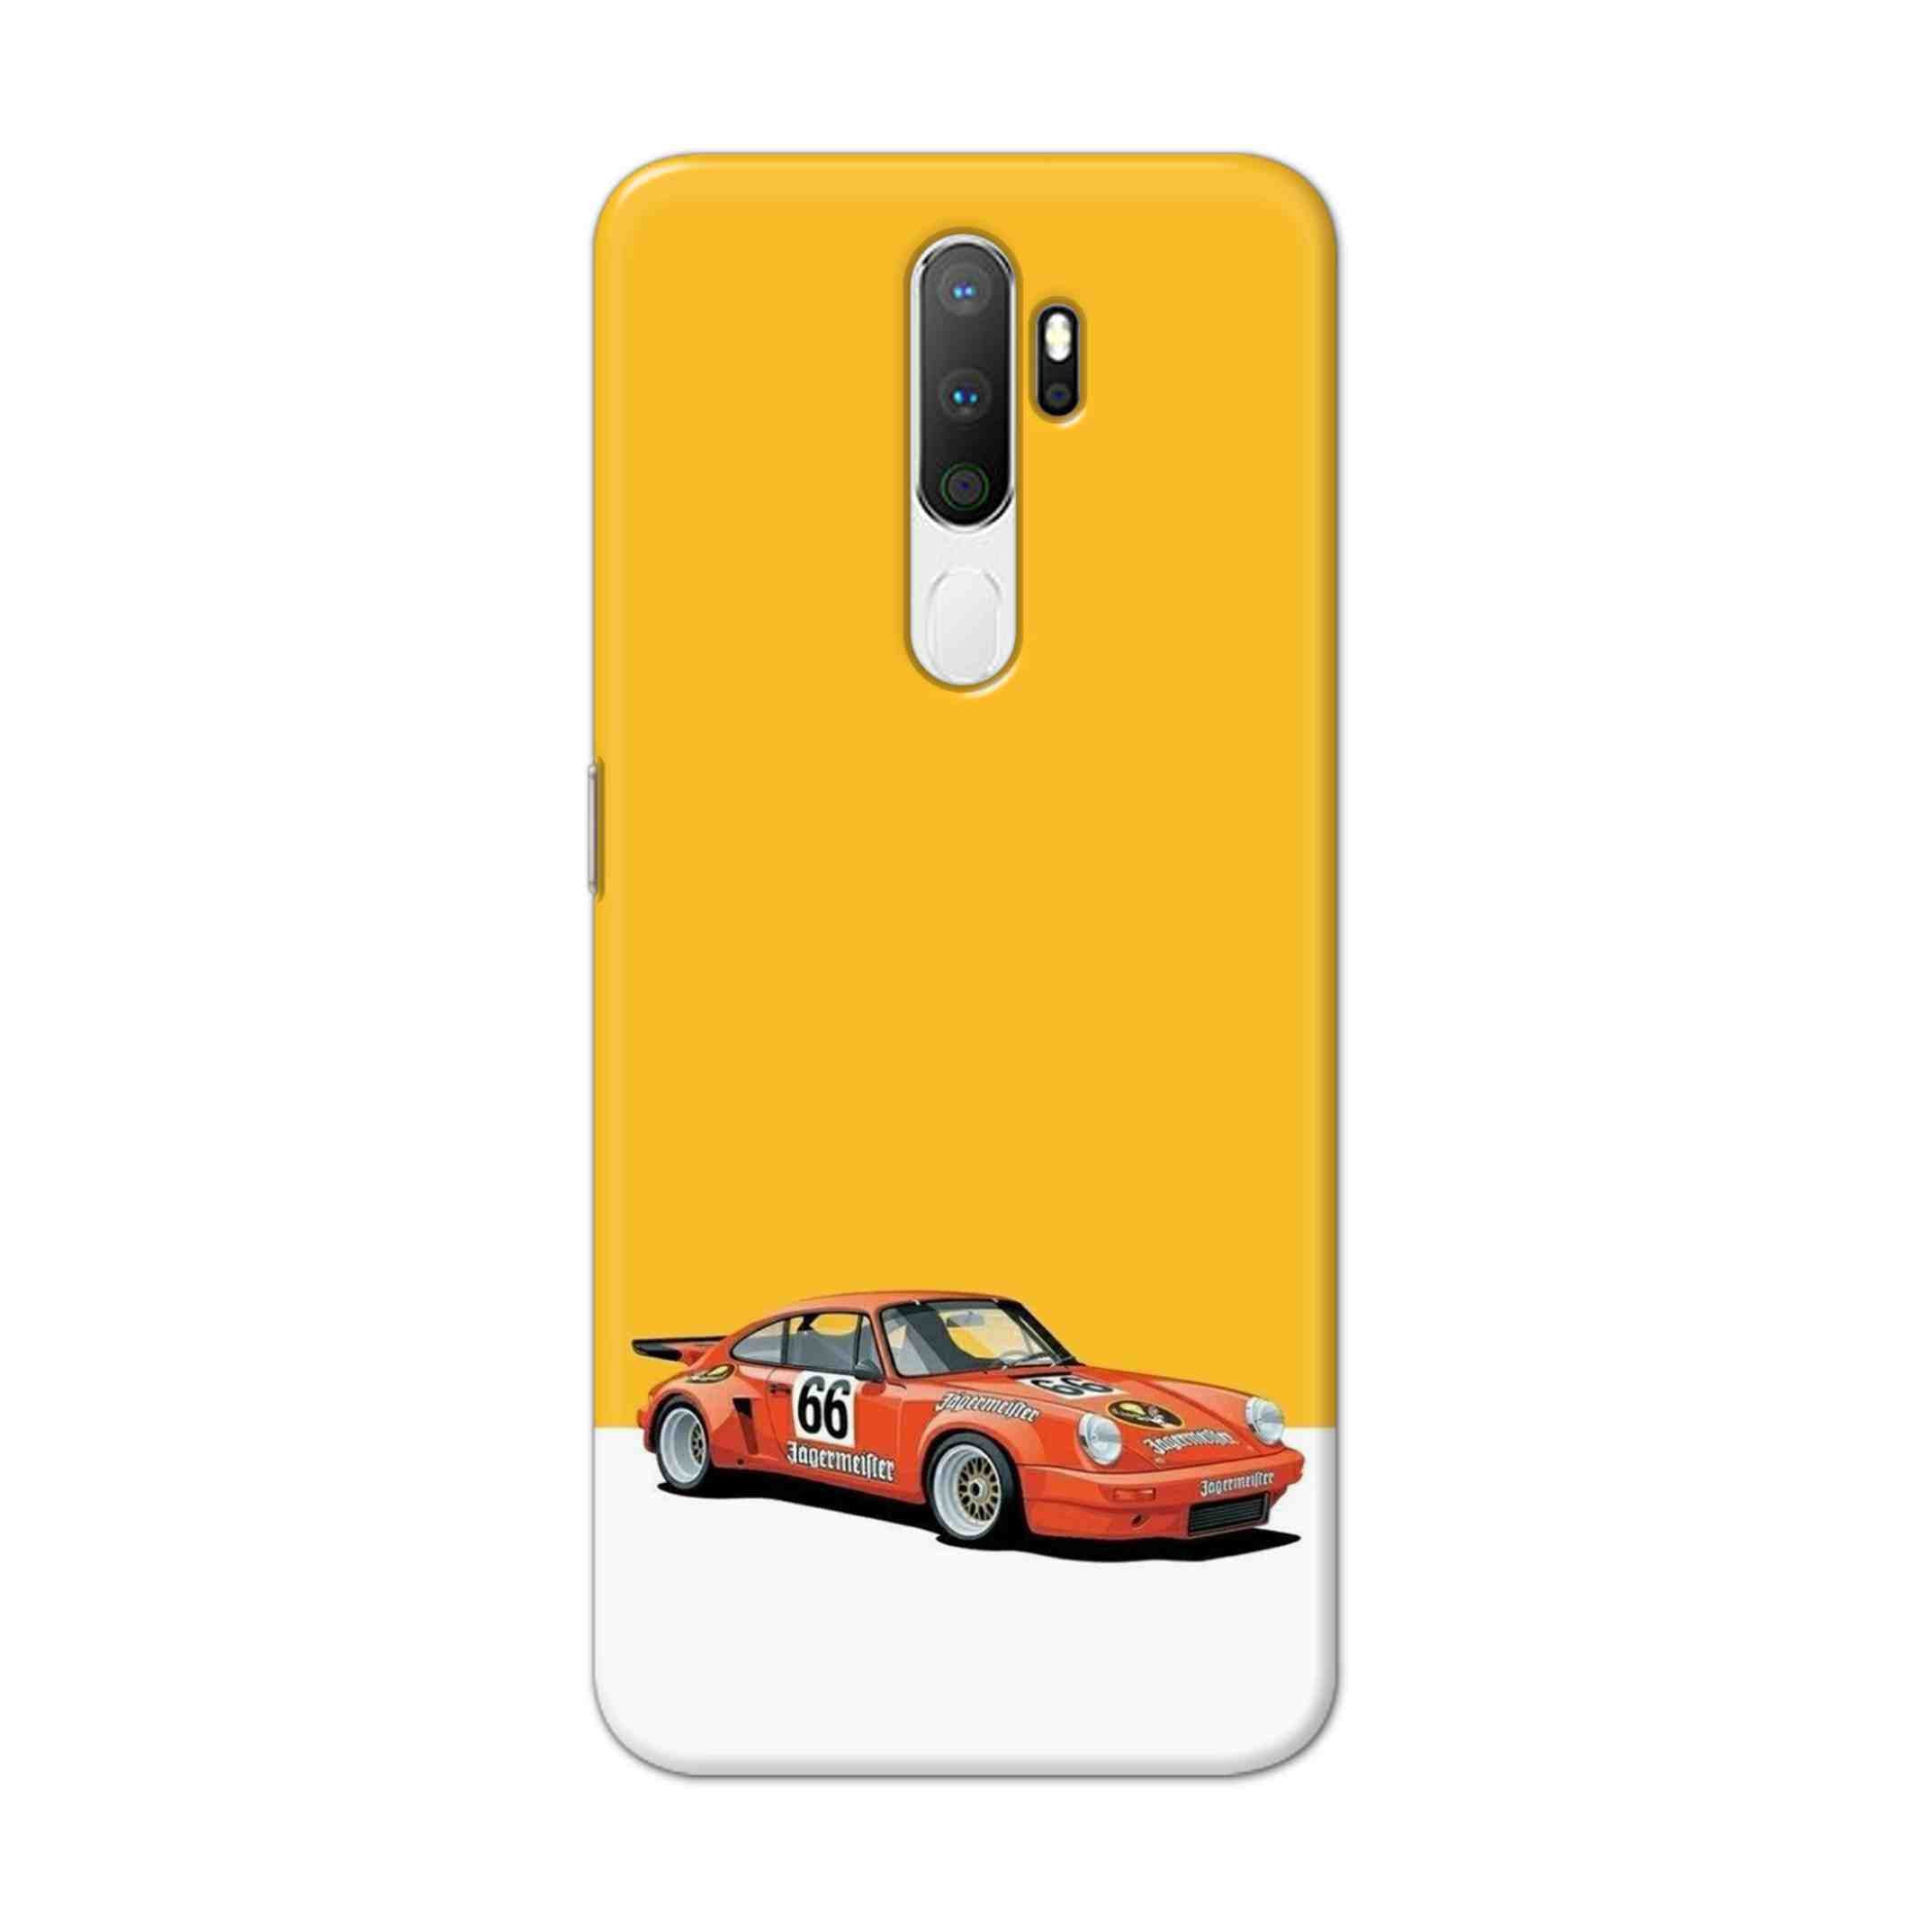 Buy Porche Hard Back Mobile Phone Case Cover For Oppo A5 (2020) Online